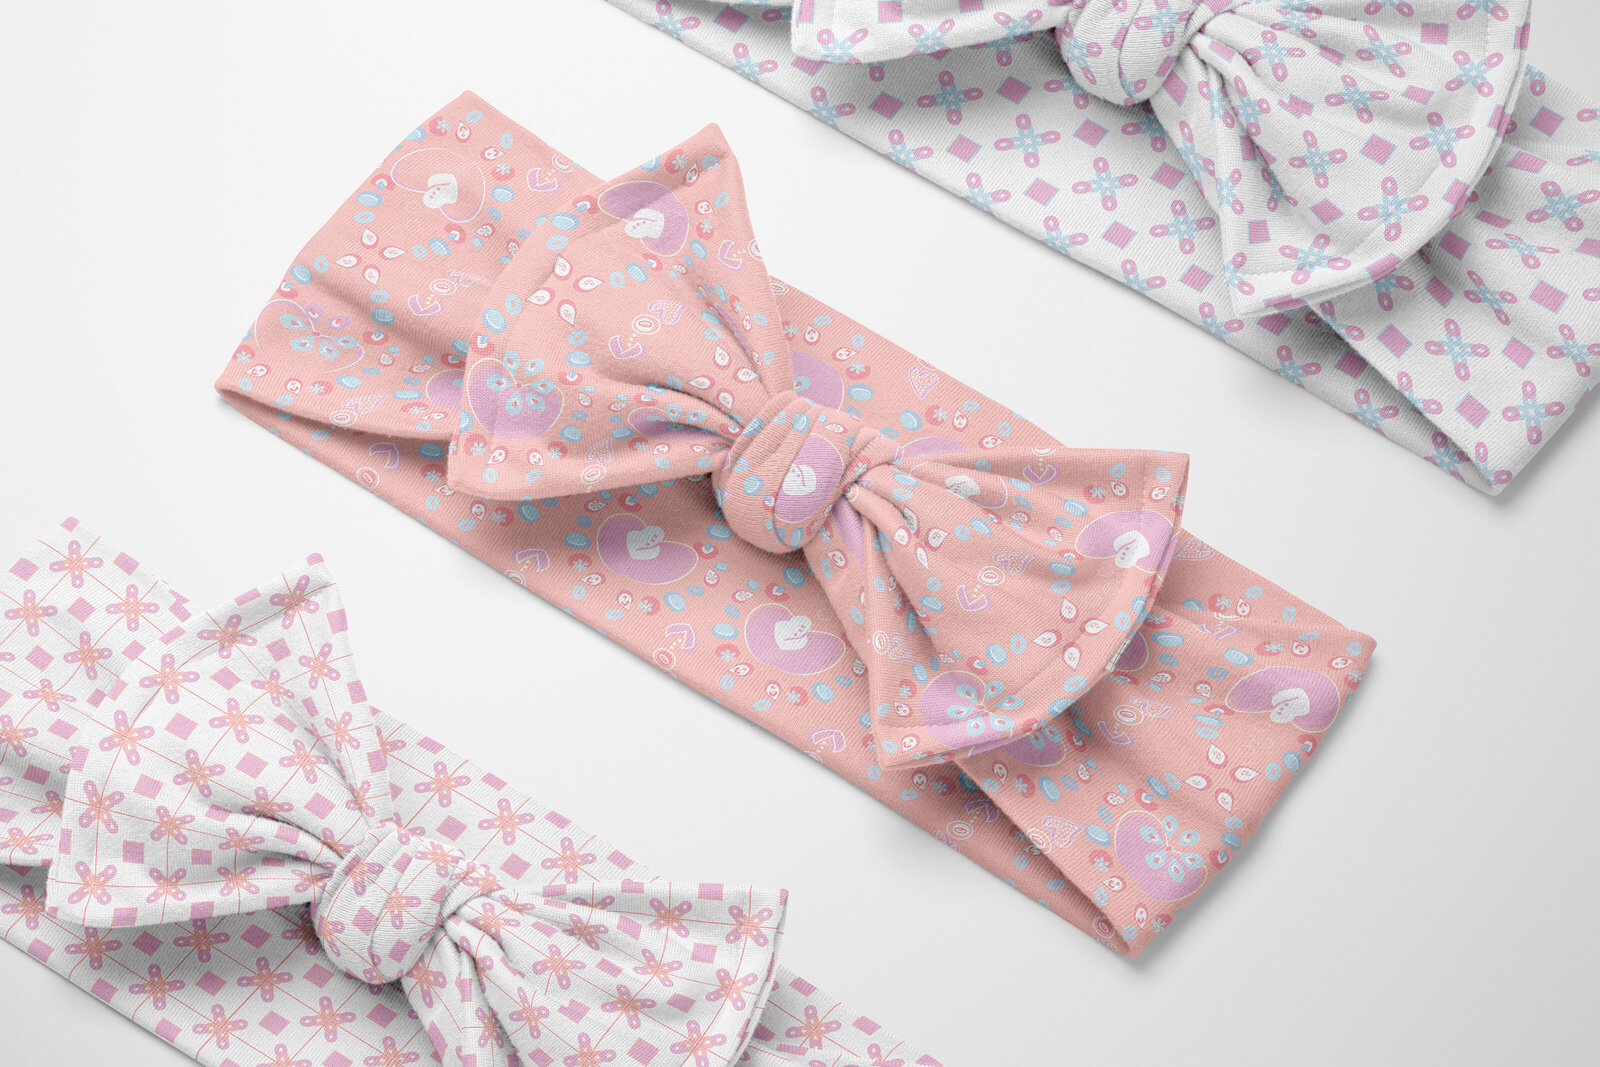 patterned fabric headbands for children